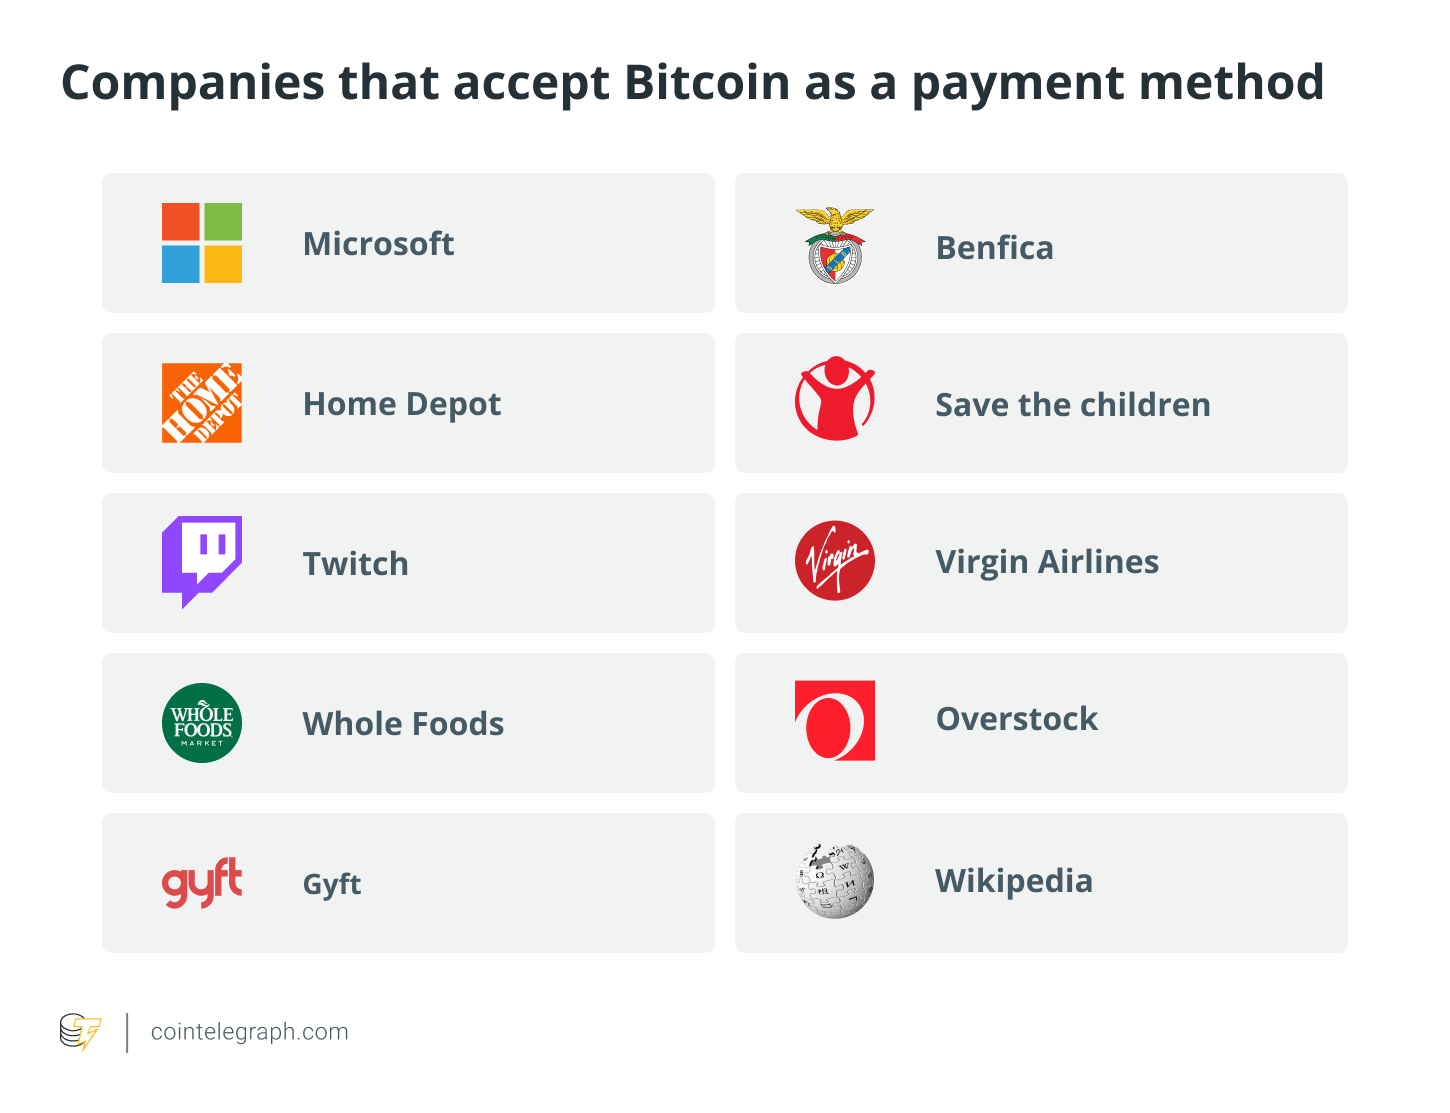 Companies that accept Bitcoin as a payment method